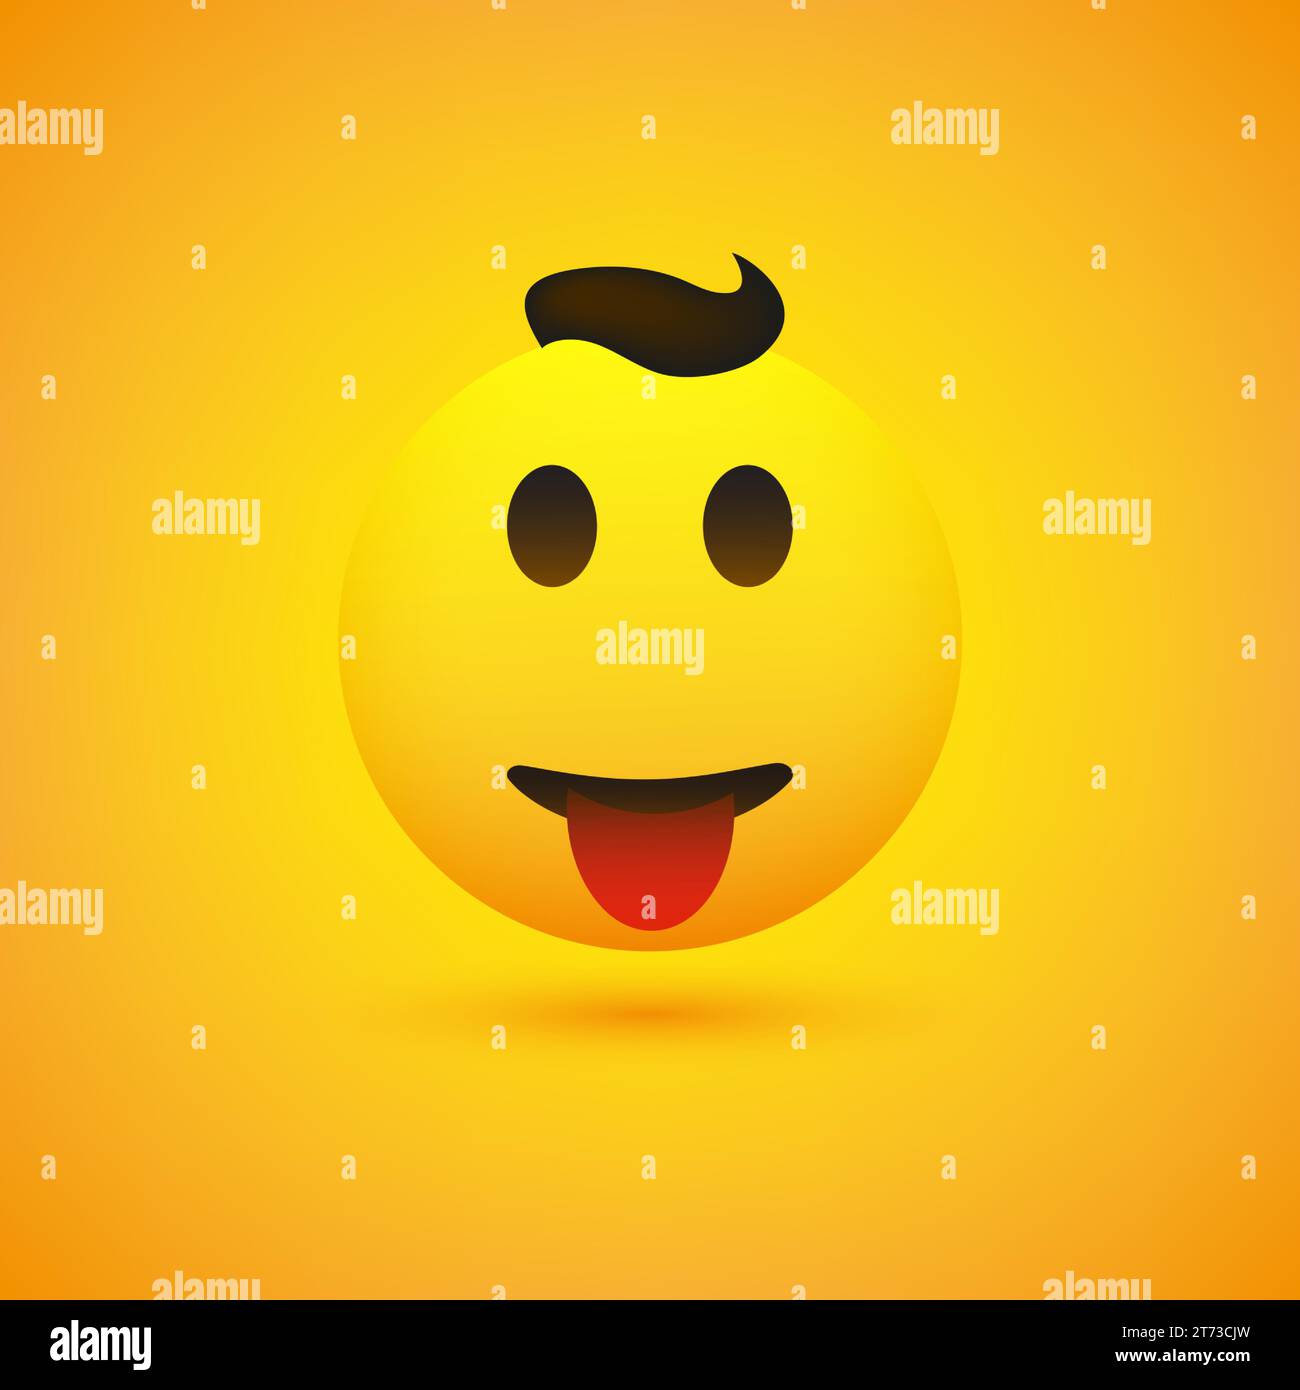 Smiling Young Male Emoji with Hair and Stuck Out Tongue - Simple Happy Emoticon on Yellow Background - Vector Design Stock Vector